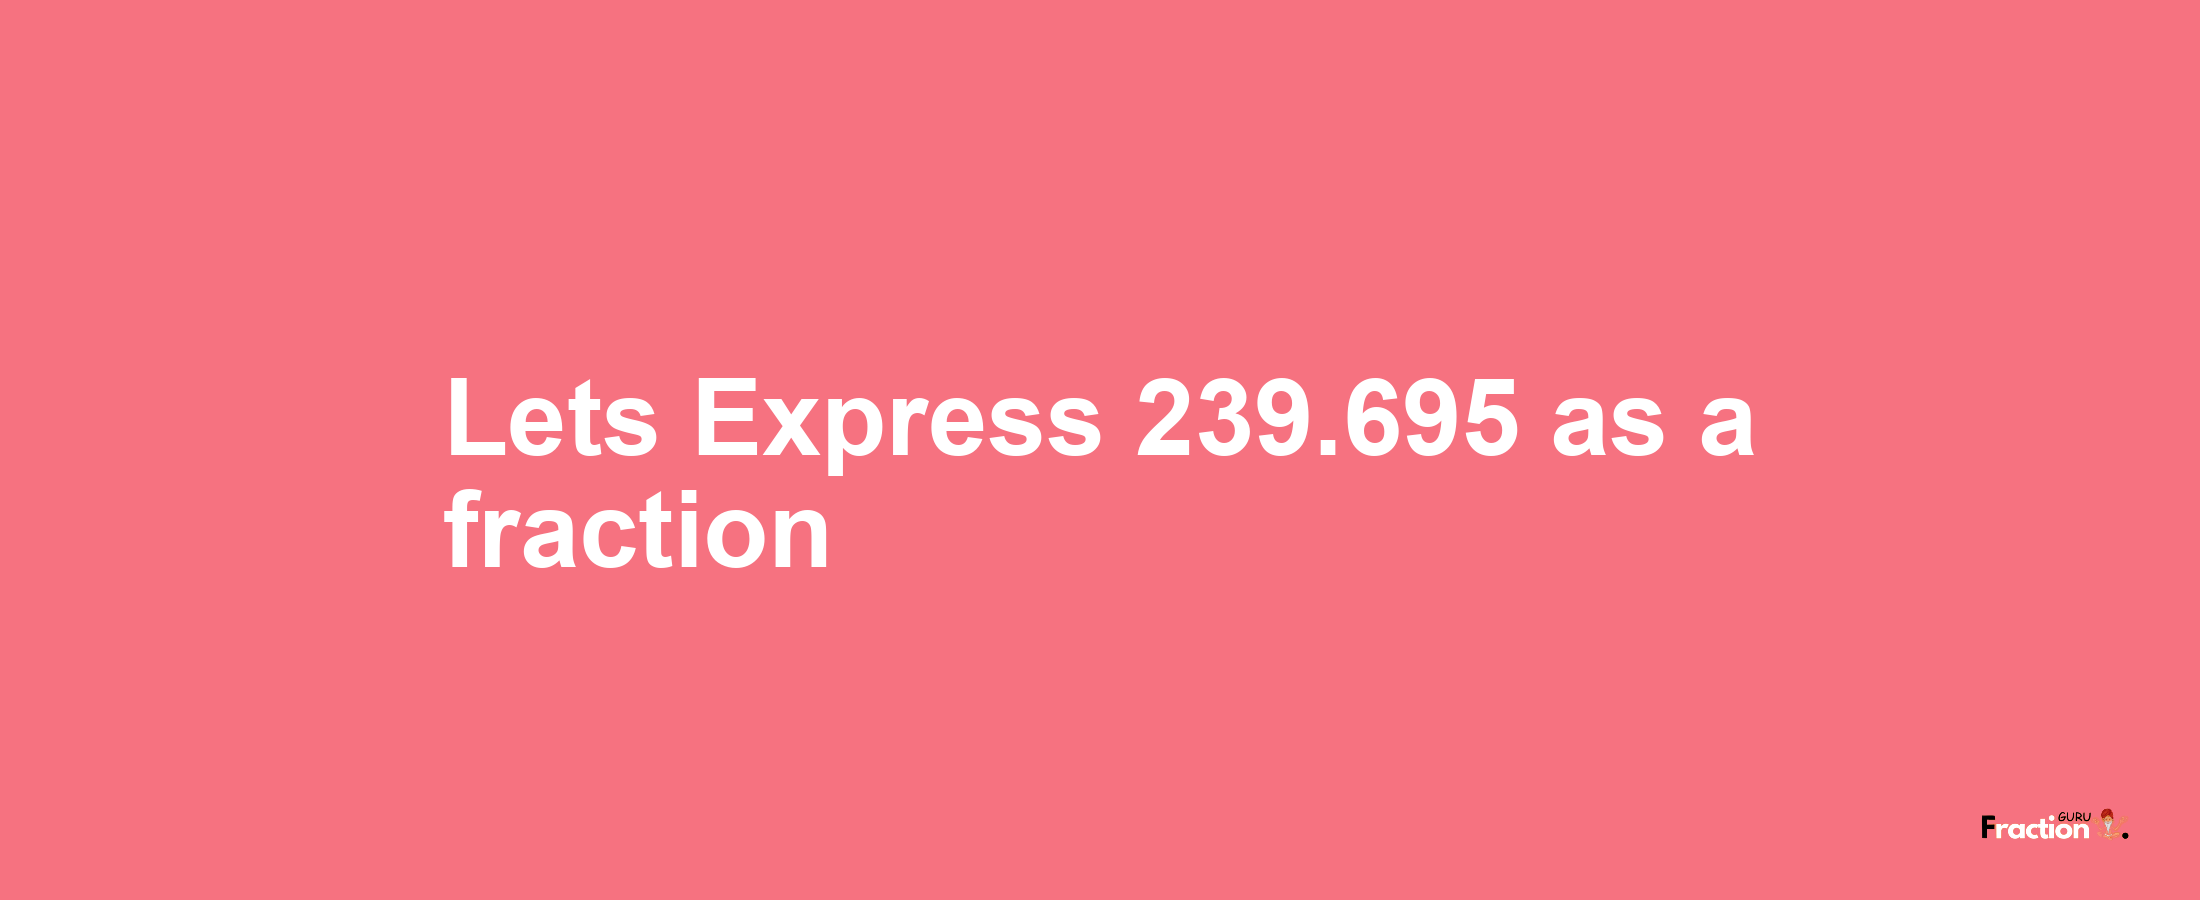 Lets Express 239.695 as afraction